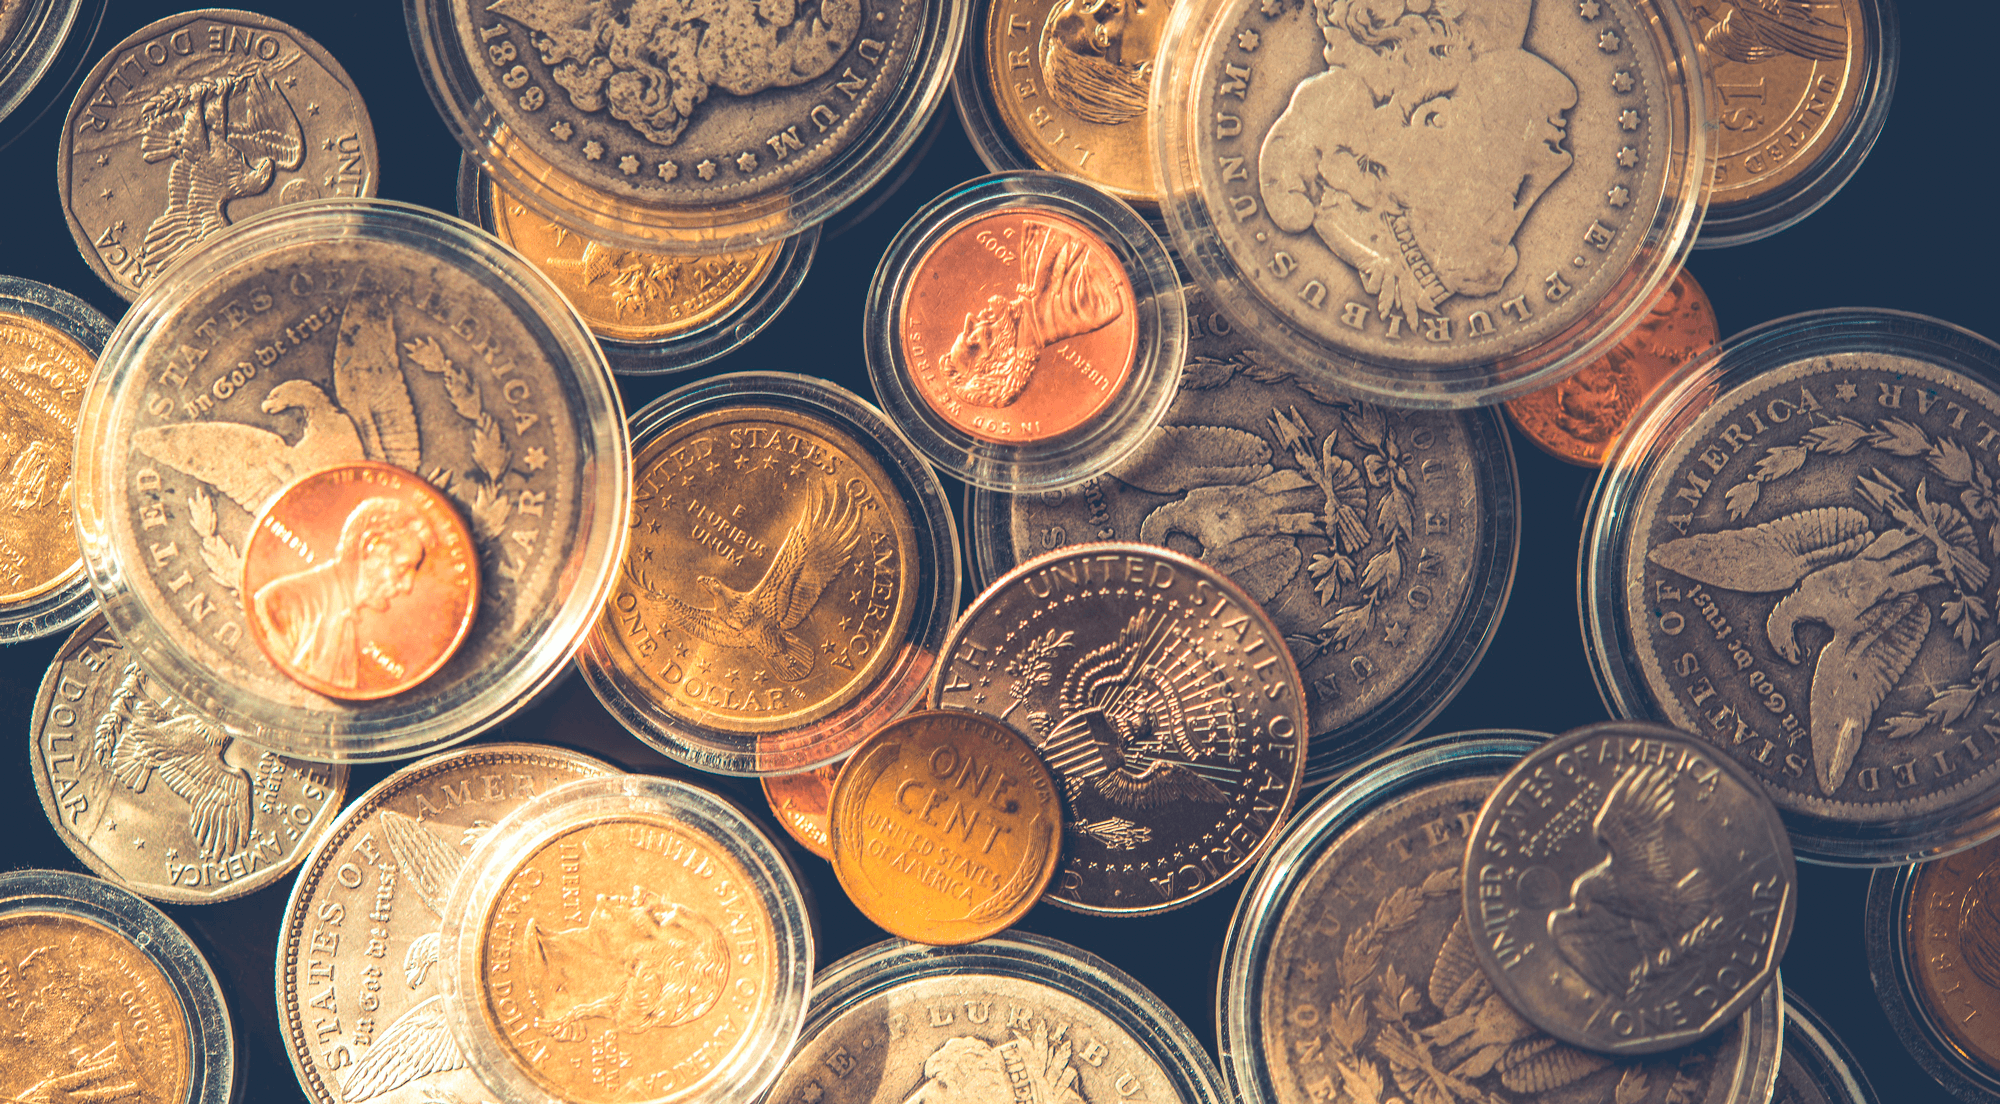 Coin Collecting vs. Investing in Coins: Which Is Right for You?